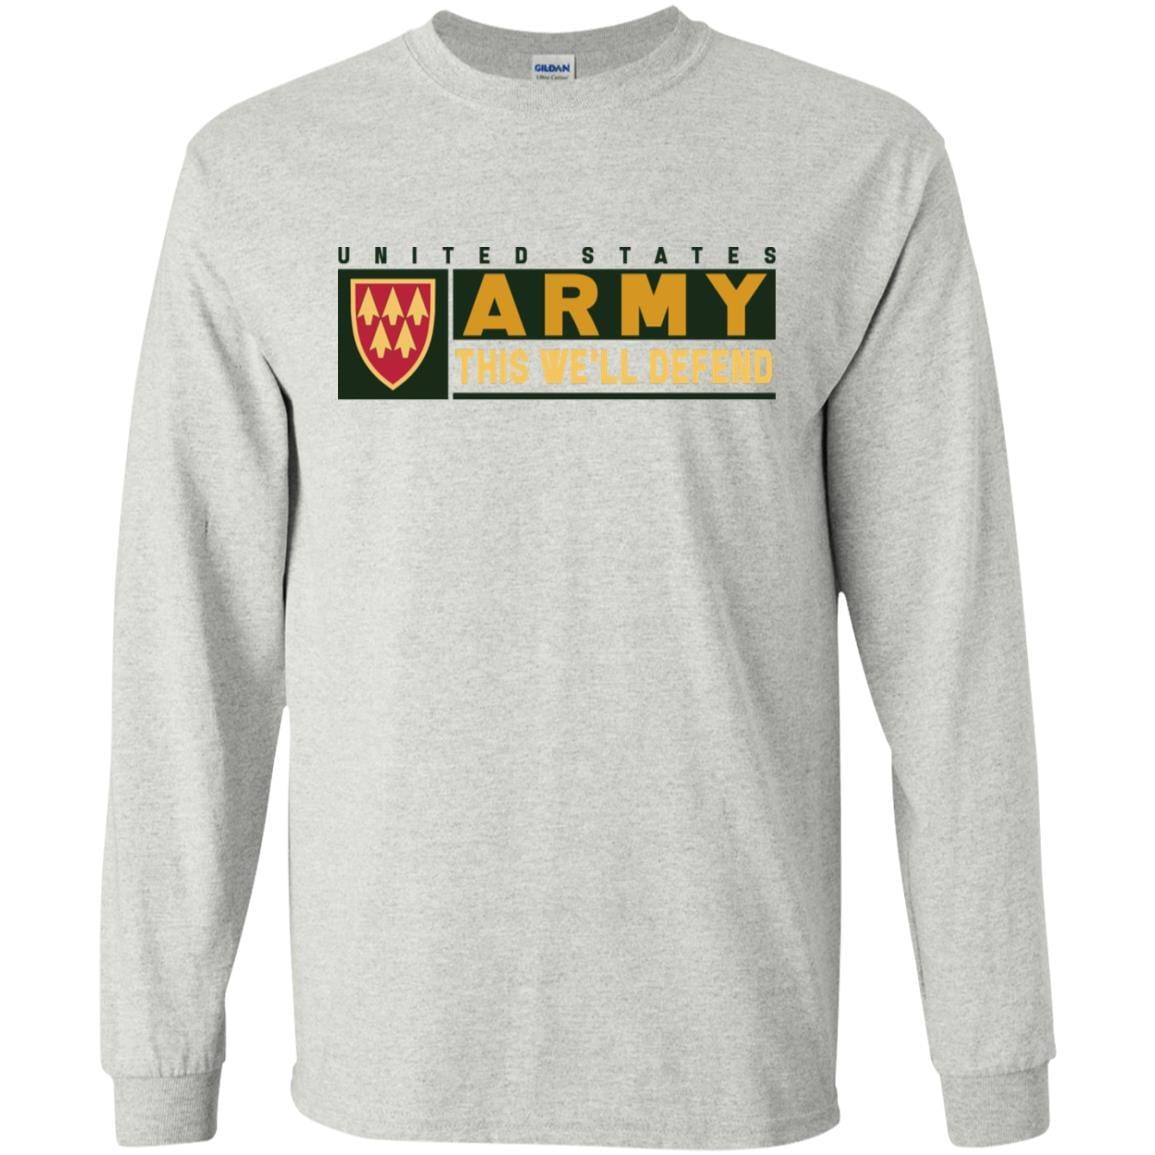 US Army 32ND AIR AND MISSILE DEFENSE COMMAND- This We'll Defend T-Shirt On Front For Men-TShirt-Army-Veterans Nation